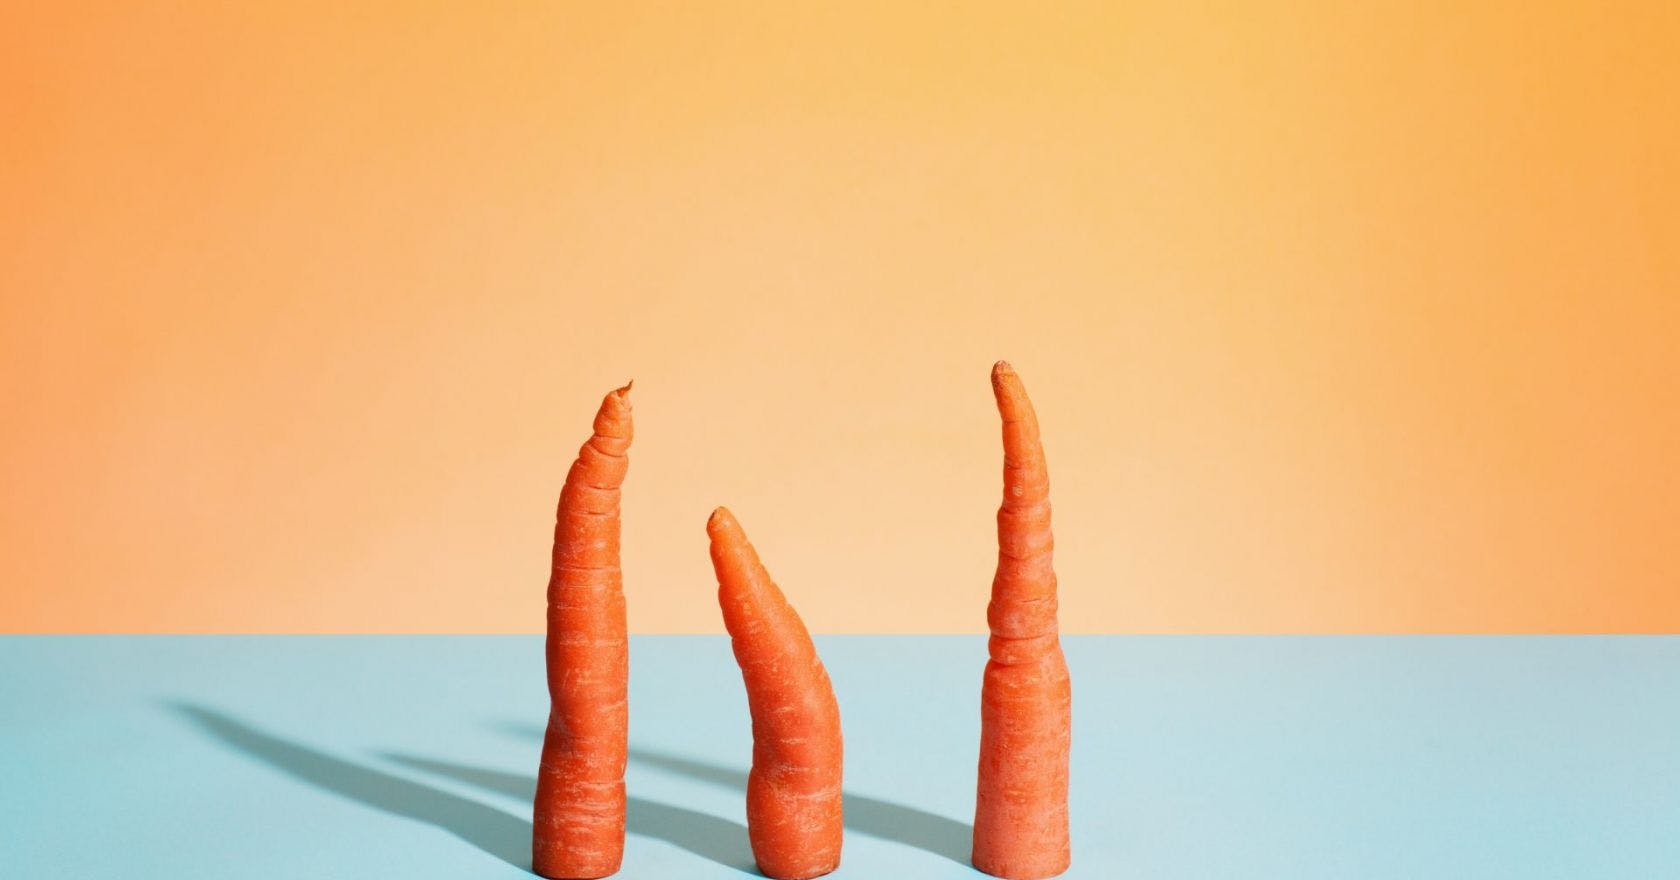 Why the humble raw carrot could be the answer to achieving optimal hormonal health